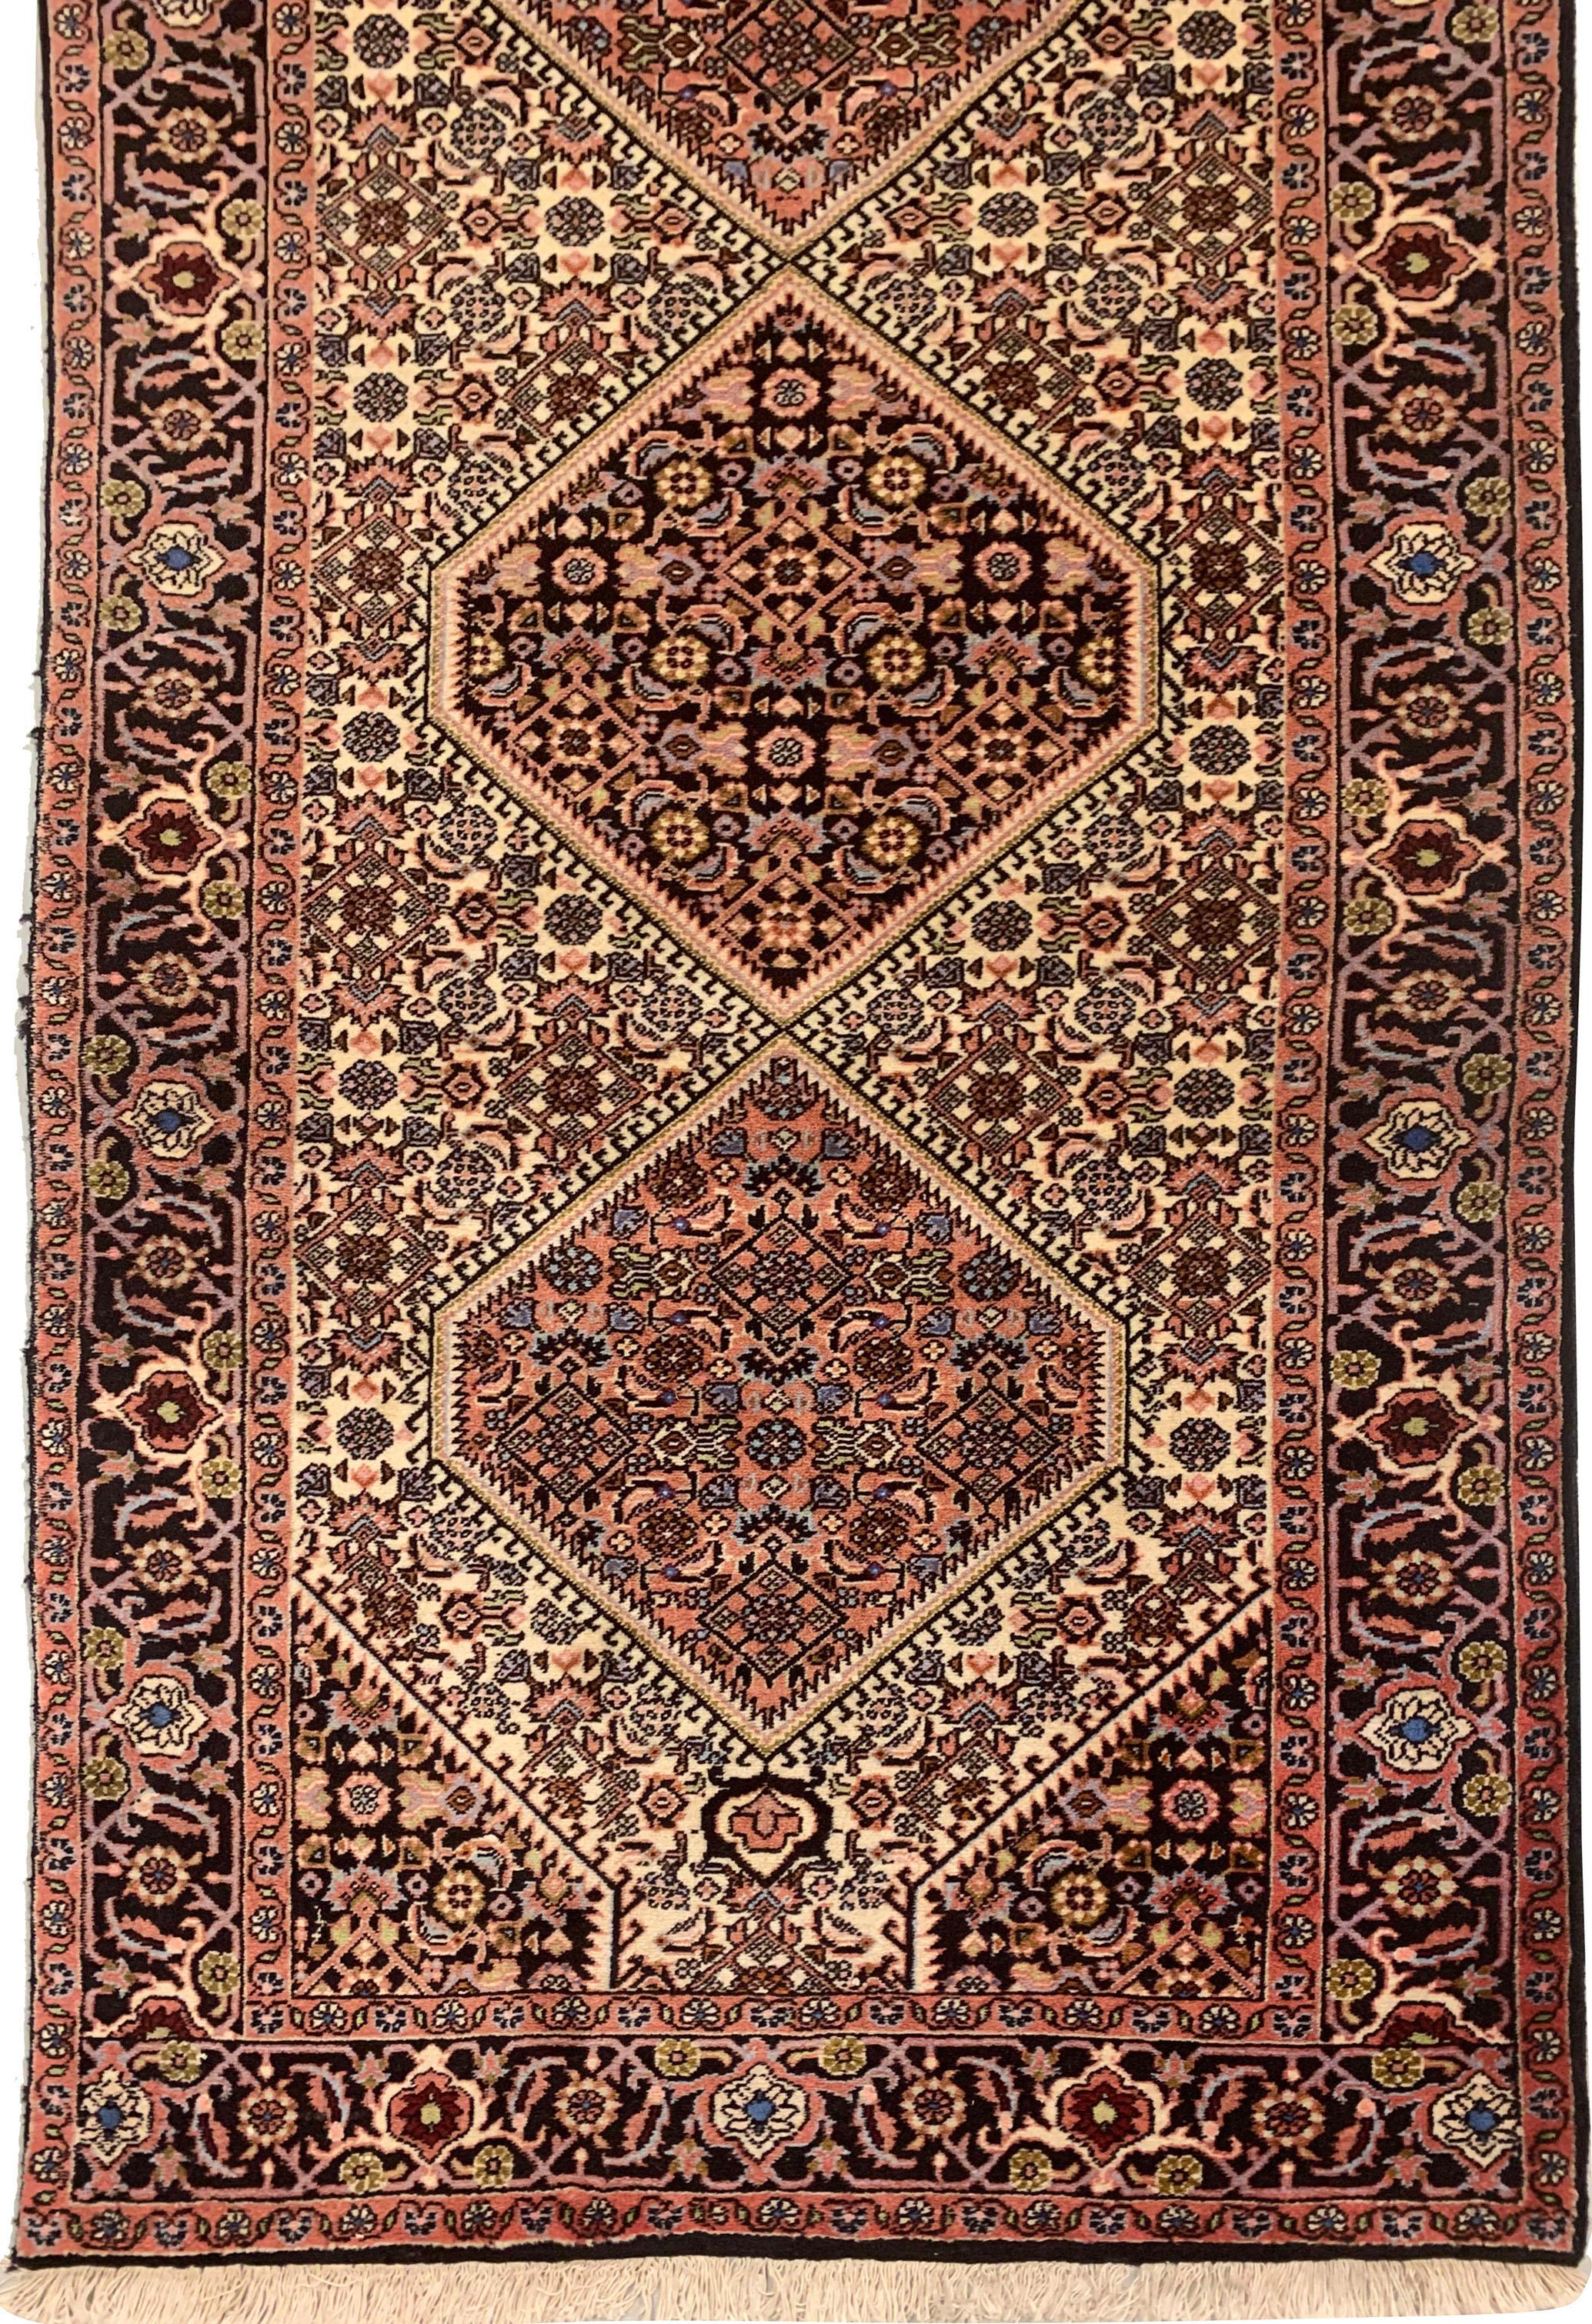 Vintage Persian Bidjar Runner Rug 2'7 X 9'9. A hand-knotted wool vintage Persian runner with a traditional design that works well in both a modern or conventional room setting. Color: ivory/ blue/ brick red